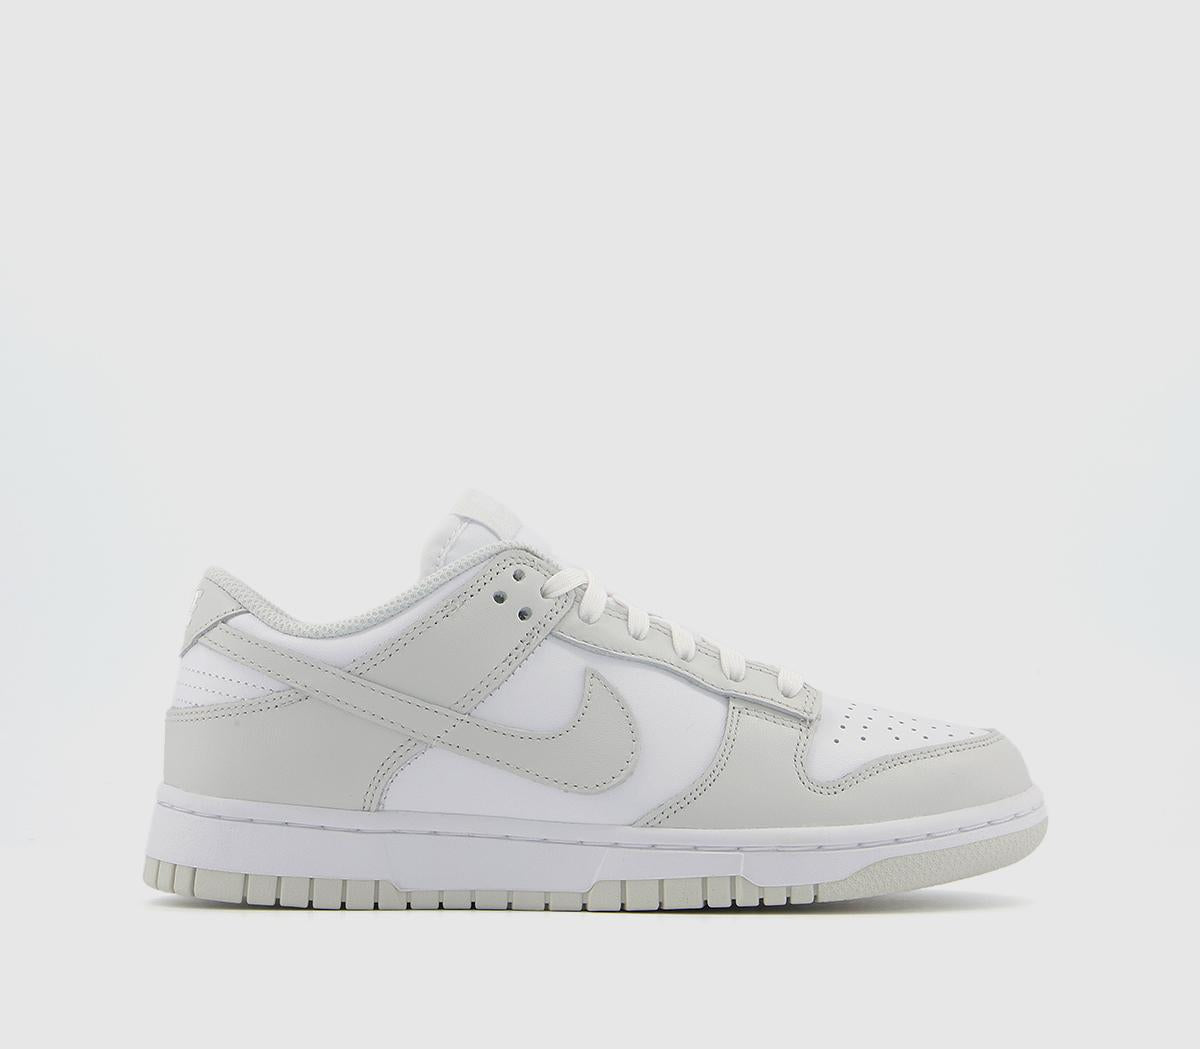 Nike Dunk Low Trainers White Photon Dust White